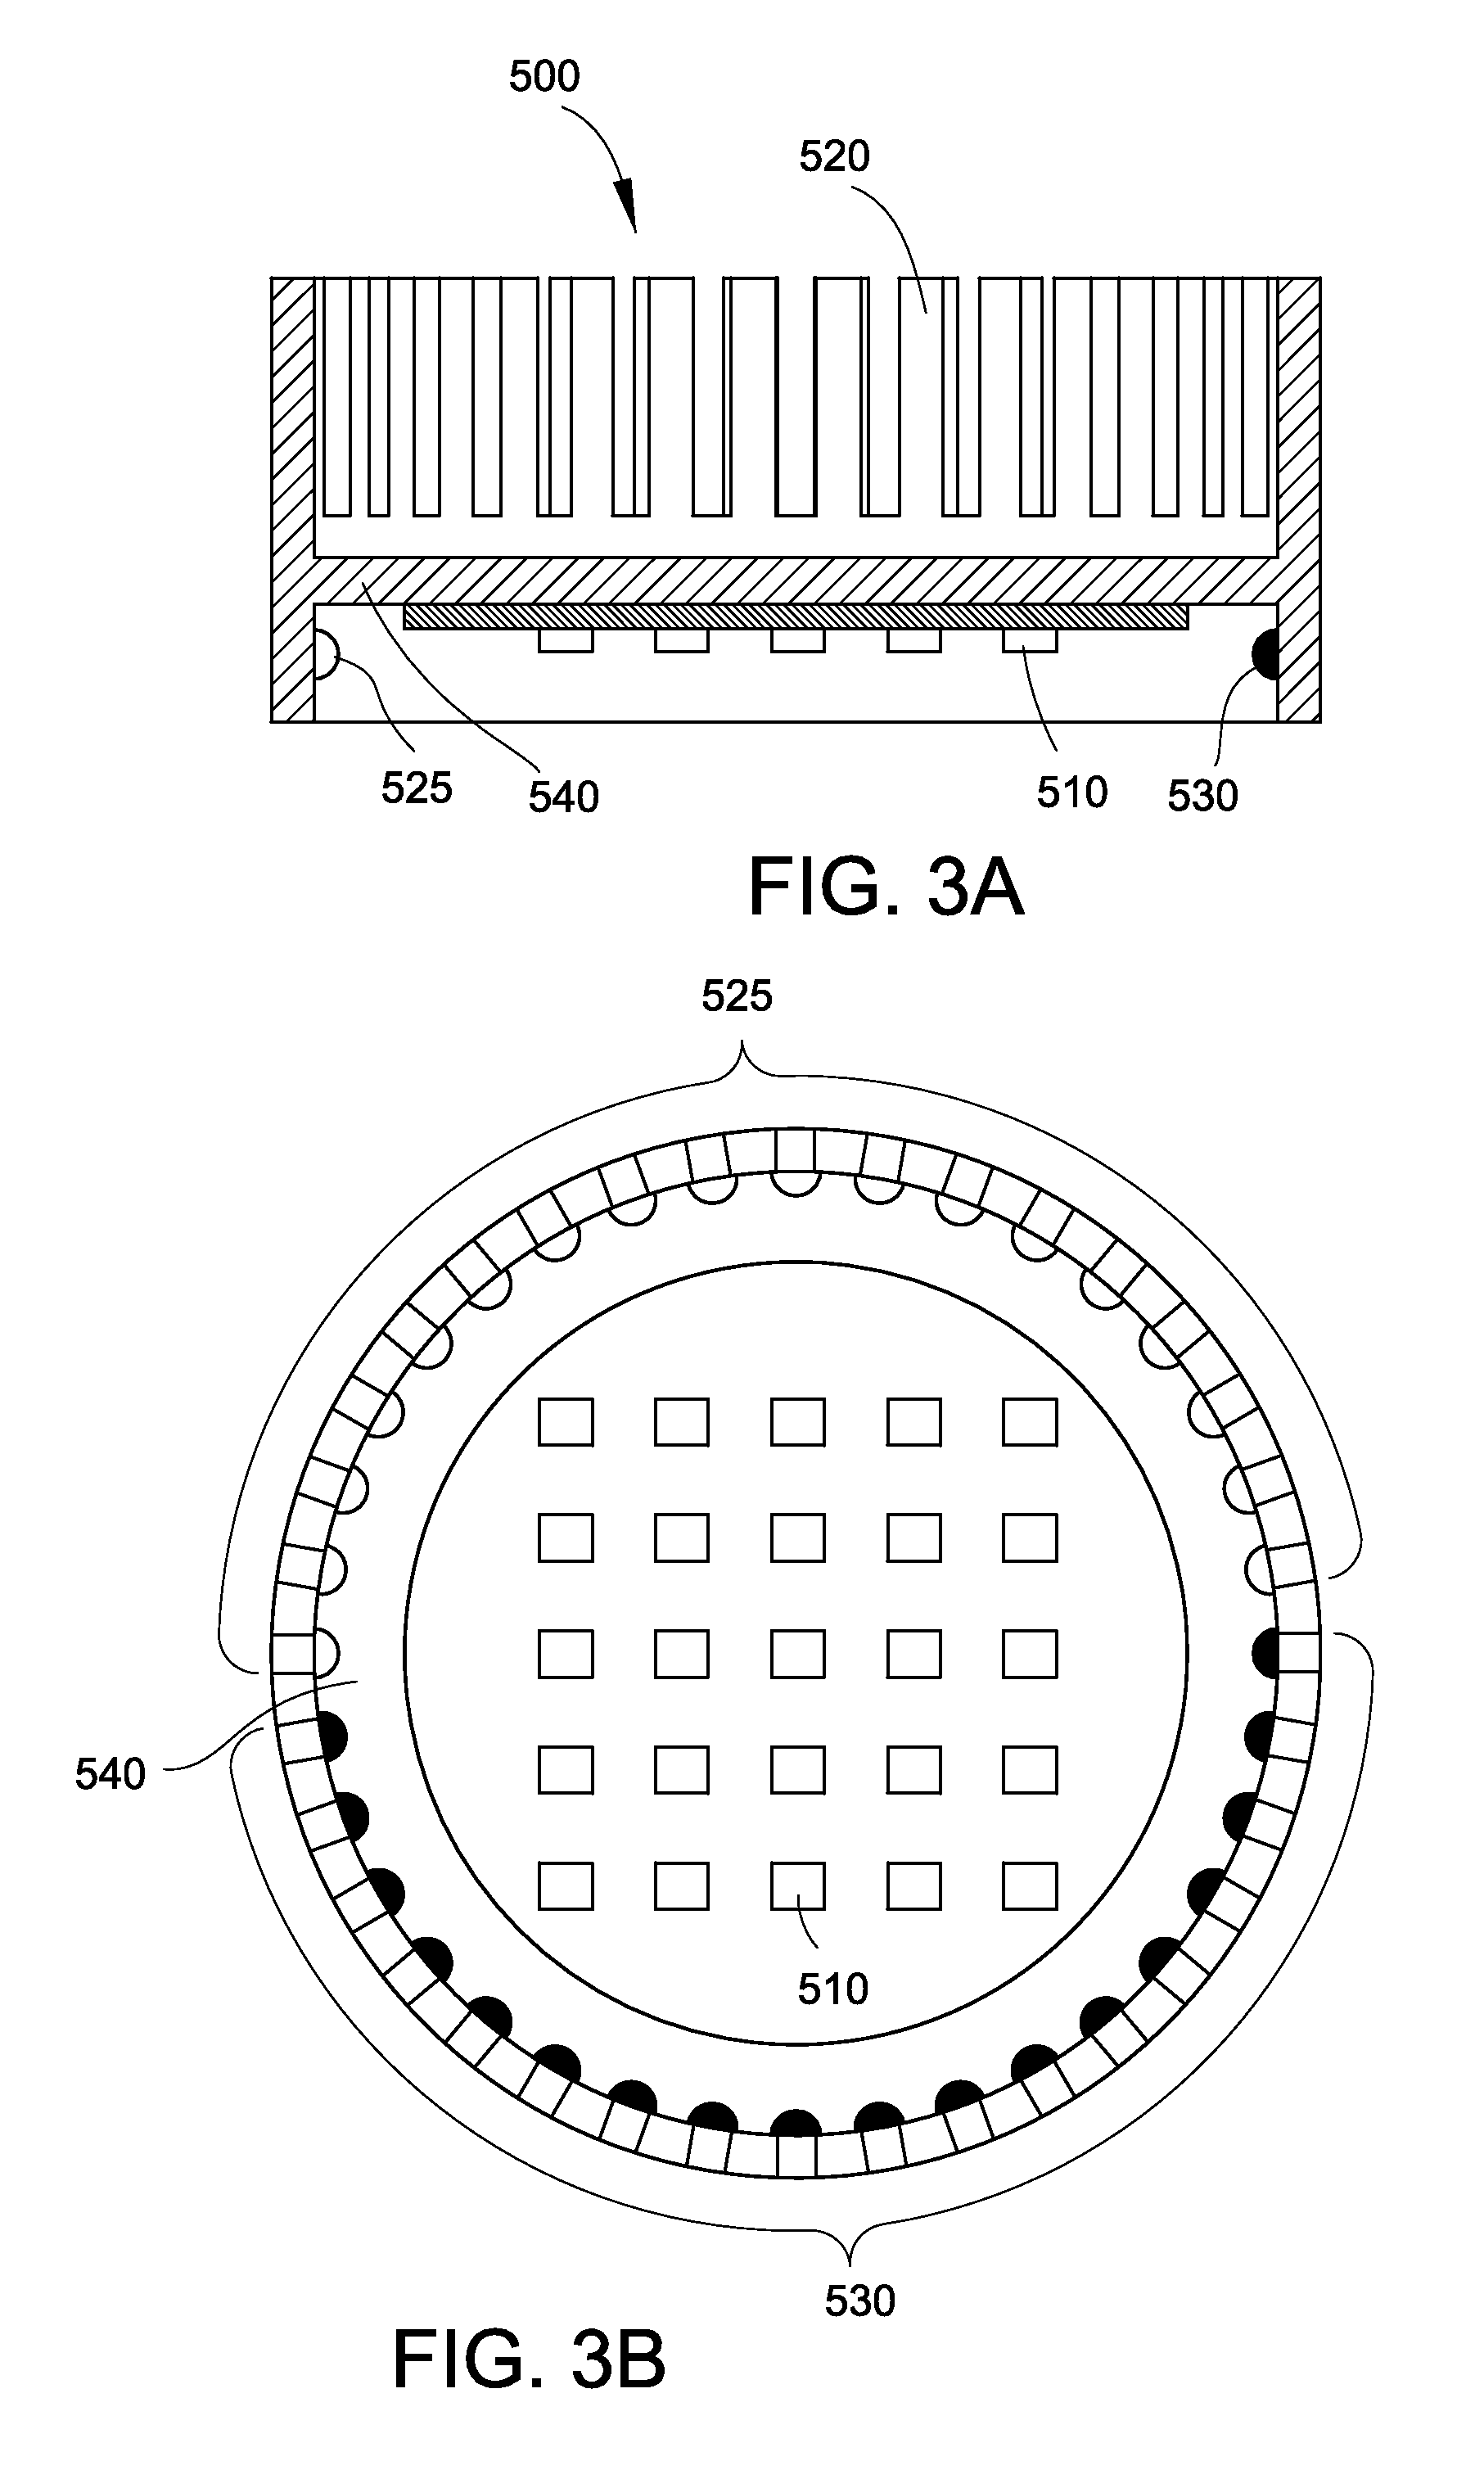 Solid-state lighting device